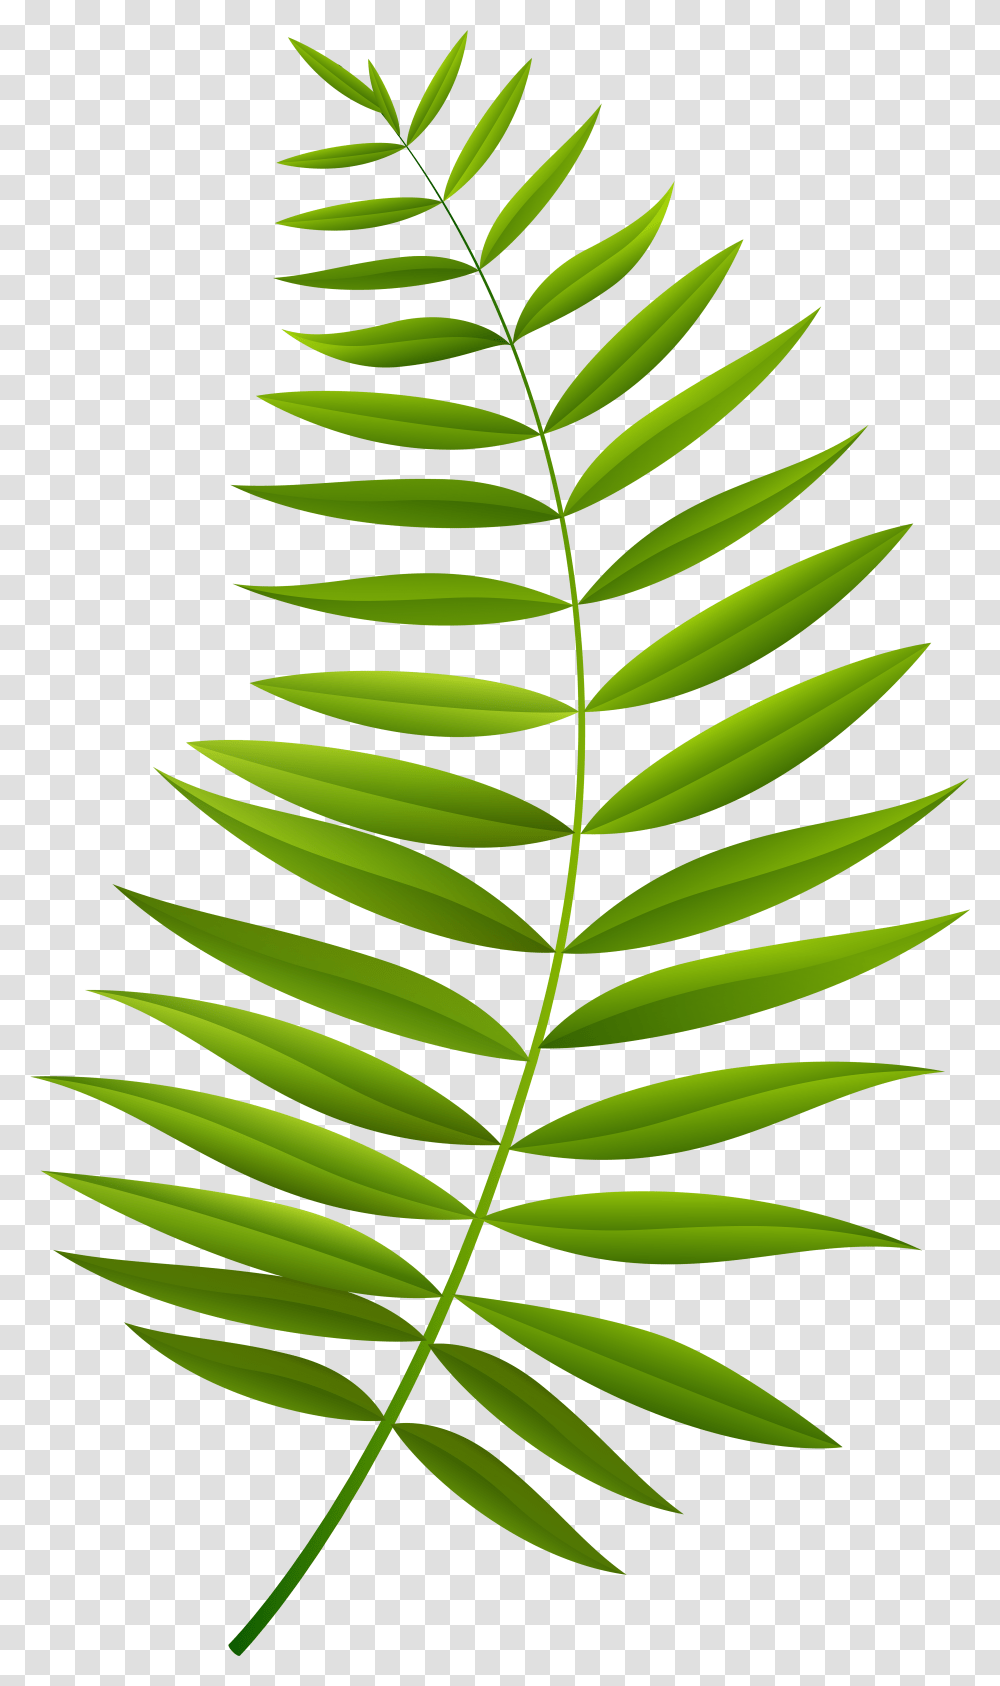 Palm Branch Clip Art Image Gallery Palm Leaf Cartoon, Green, Plant, Pineapple, Fruit Transparent Png